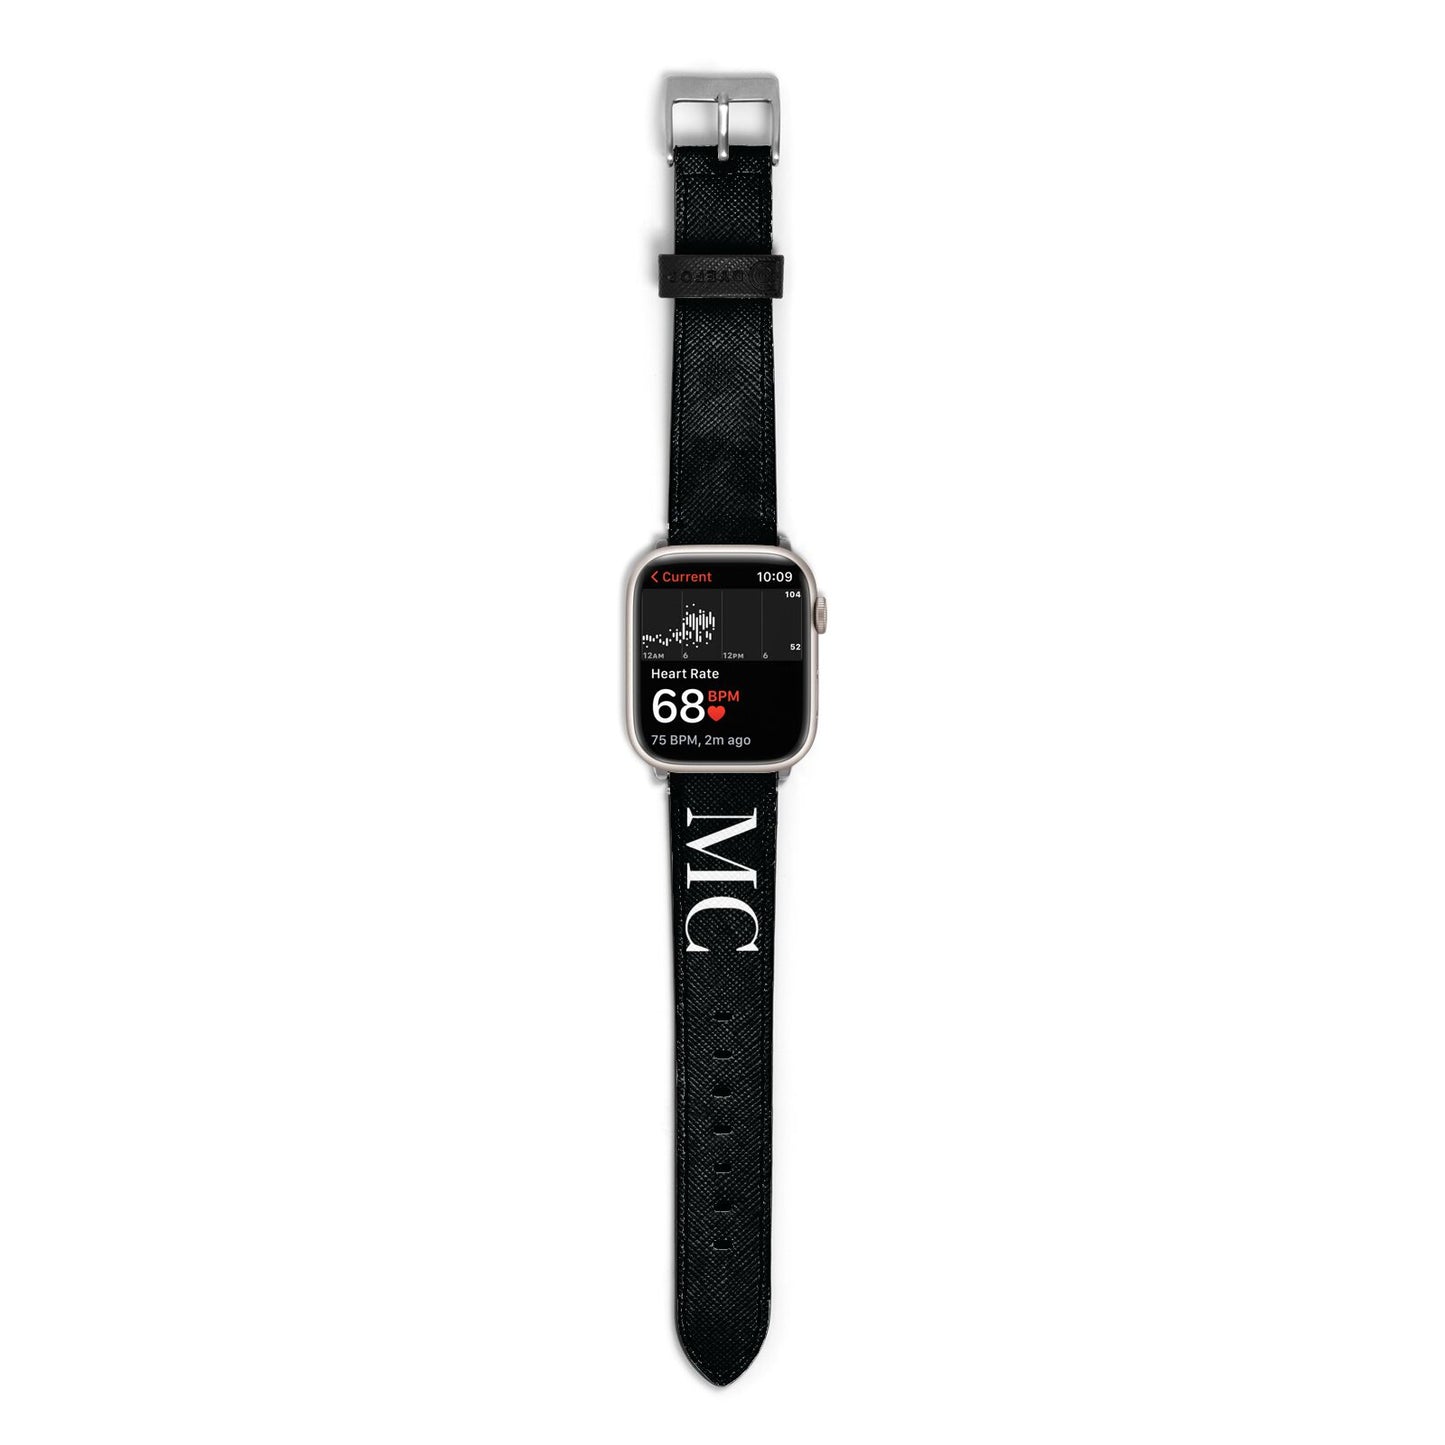 Initials Personalised 1 Apple Watch Strap Size 38mm with Silver Hardware